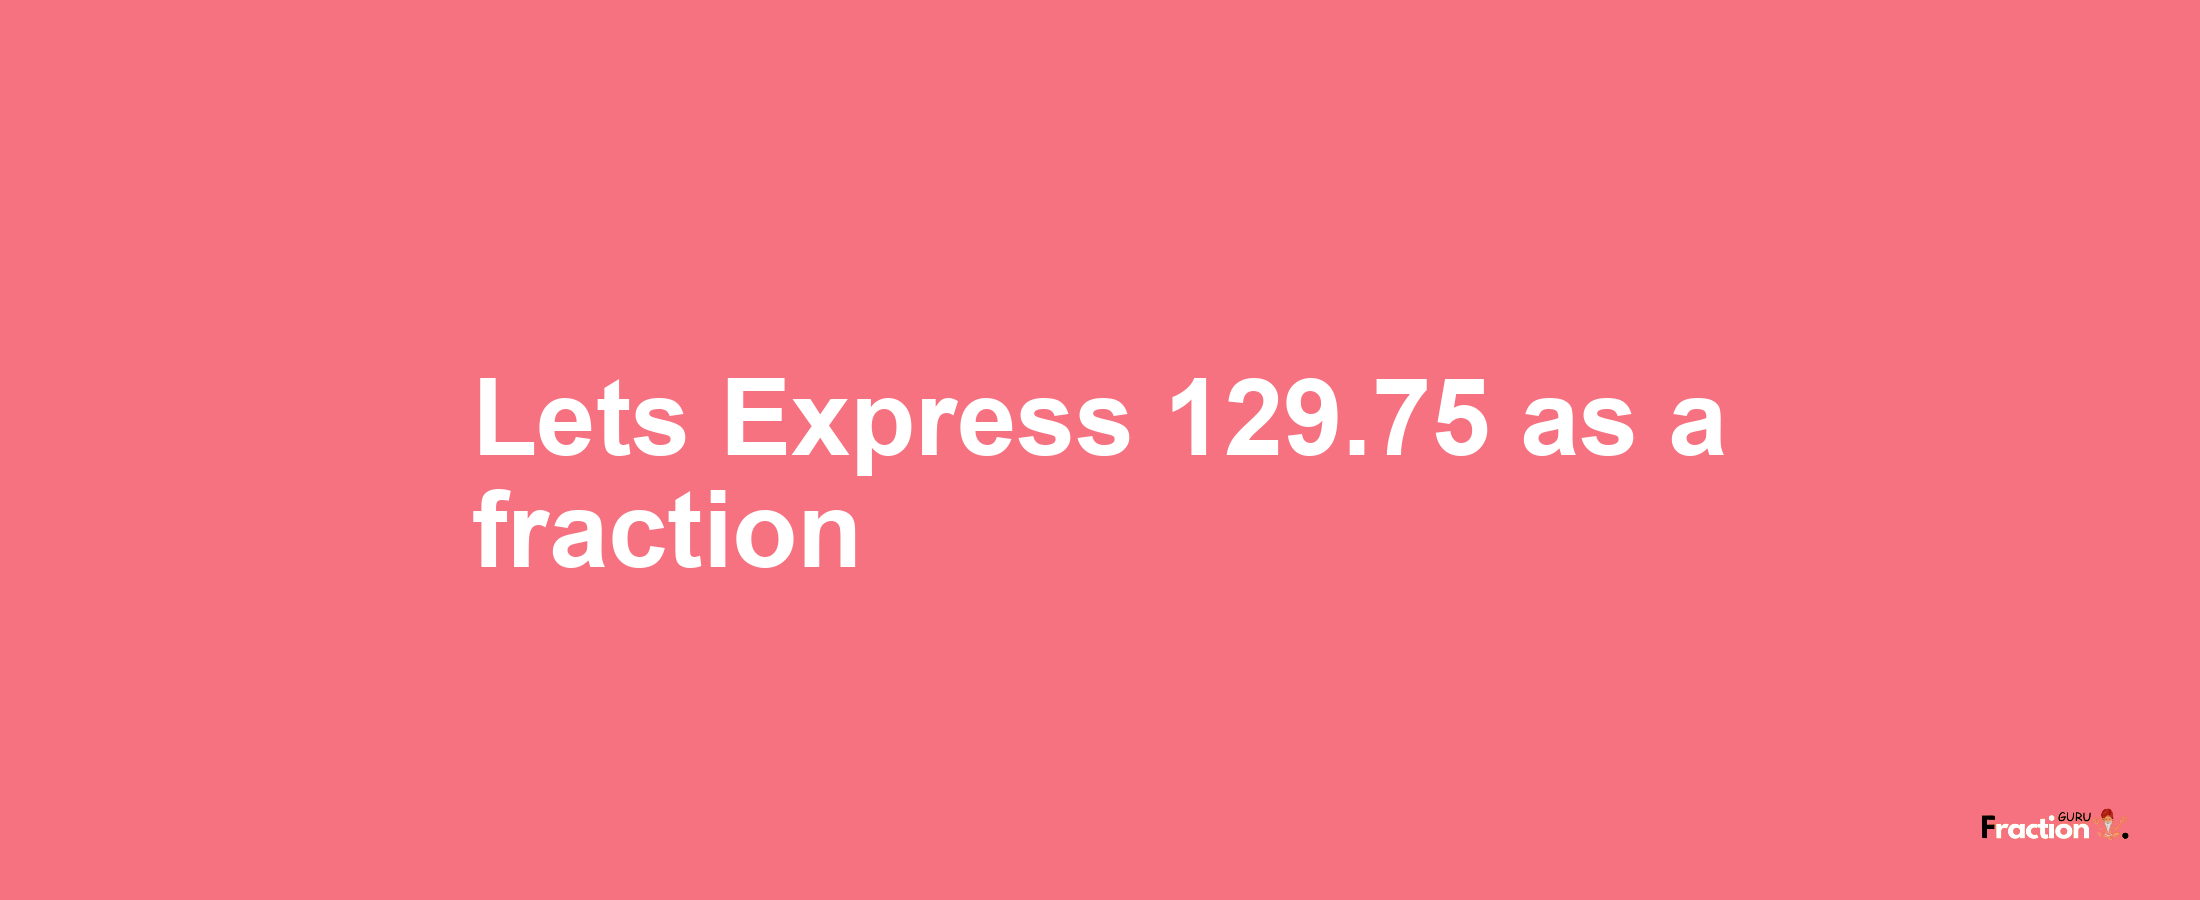 Lets Express 129.75 as afraction